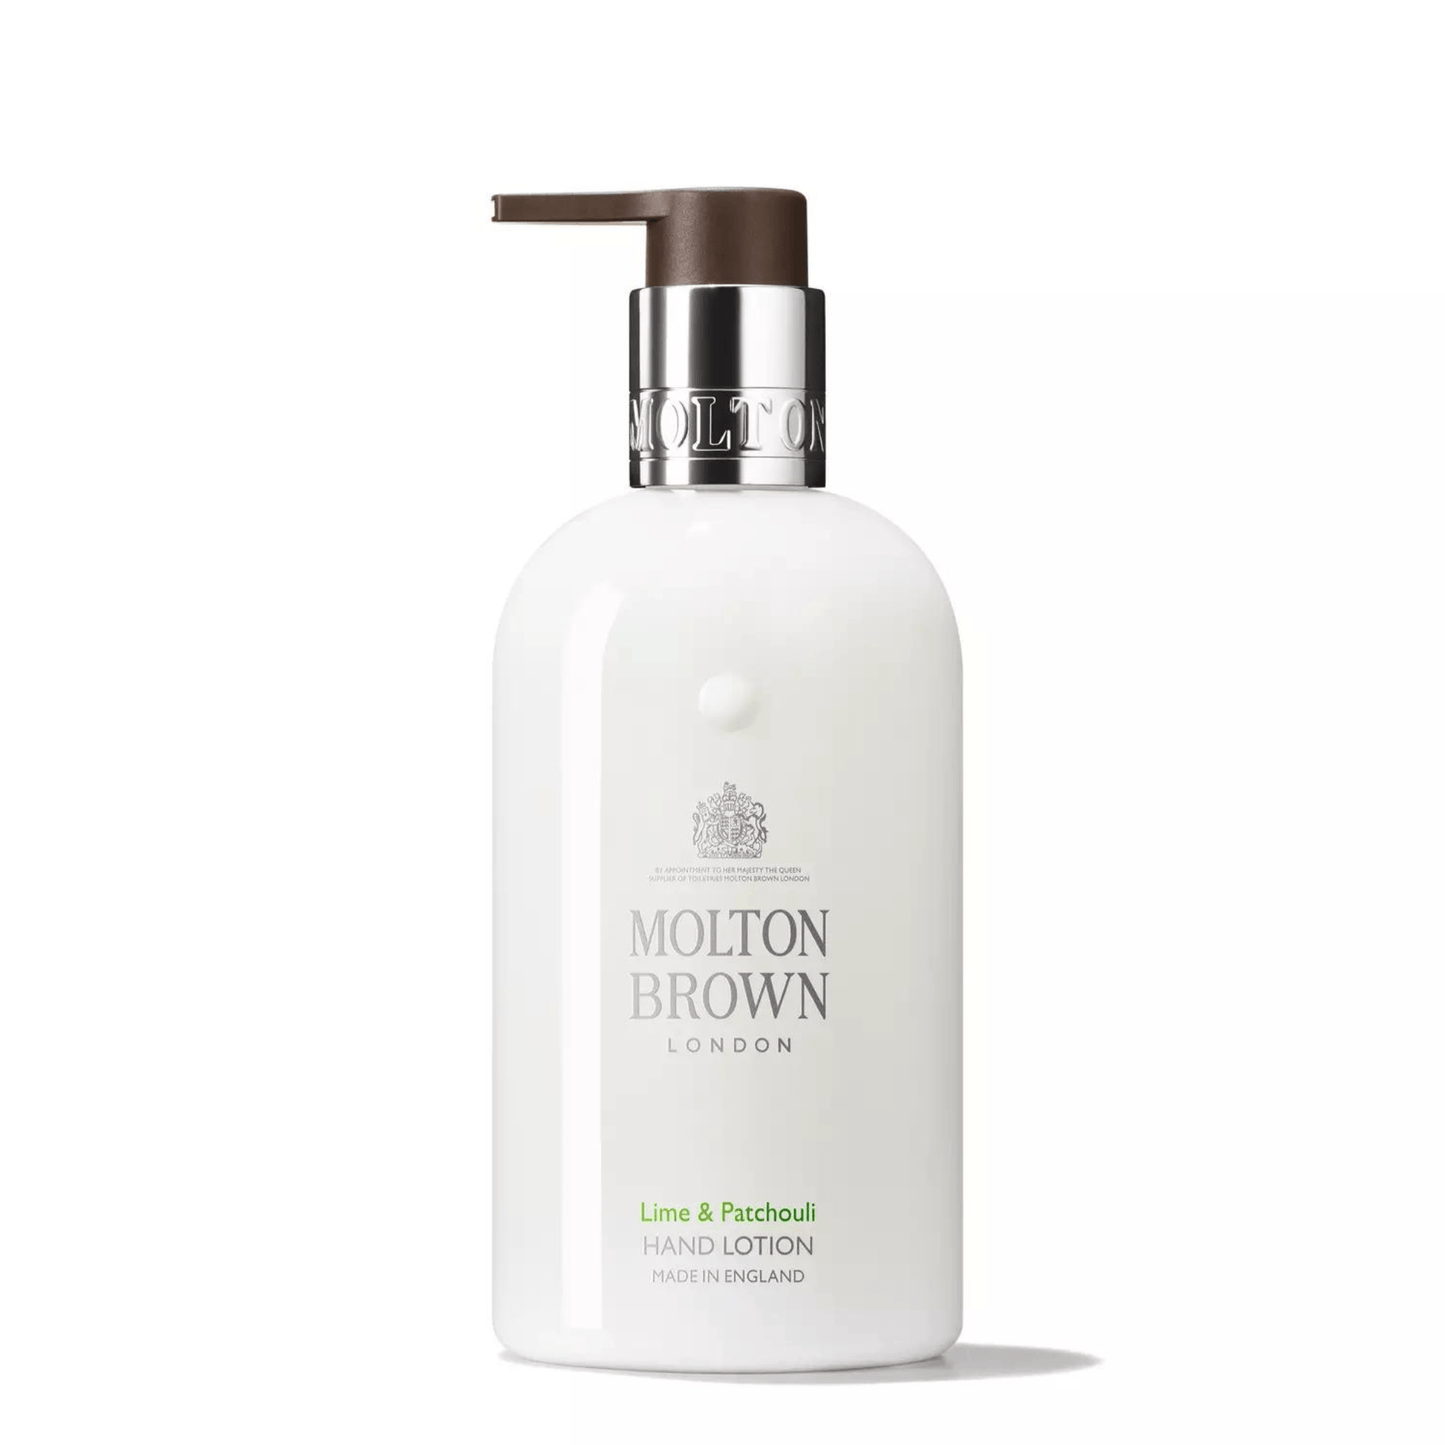 Primary Image of Lime & Patchouli Hand Lotion